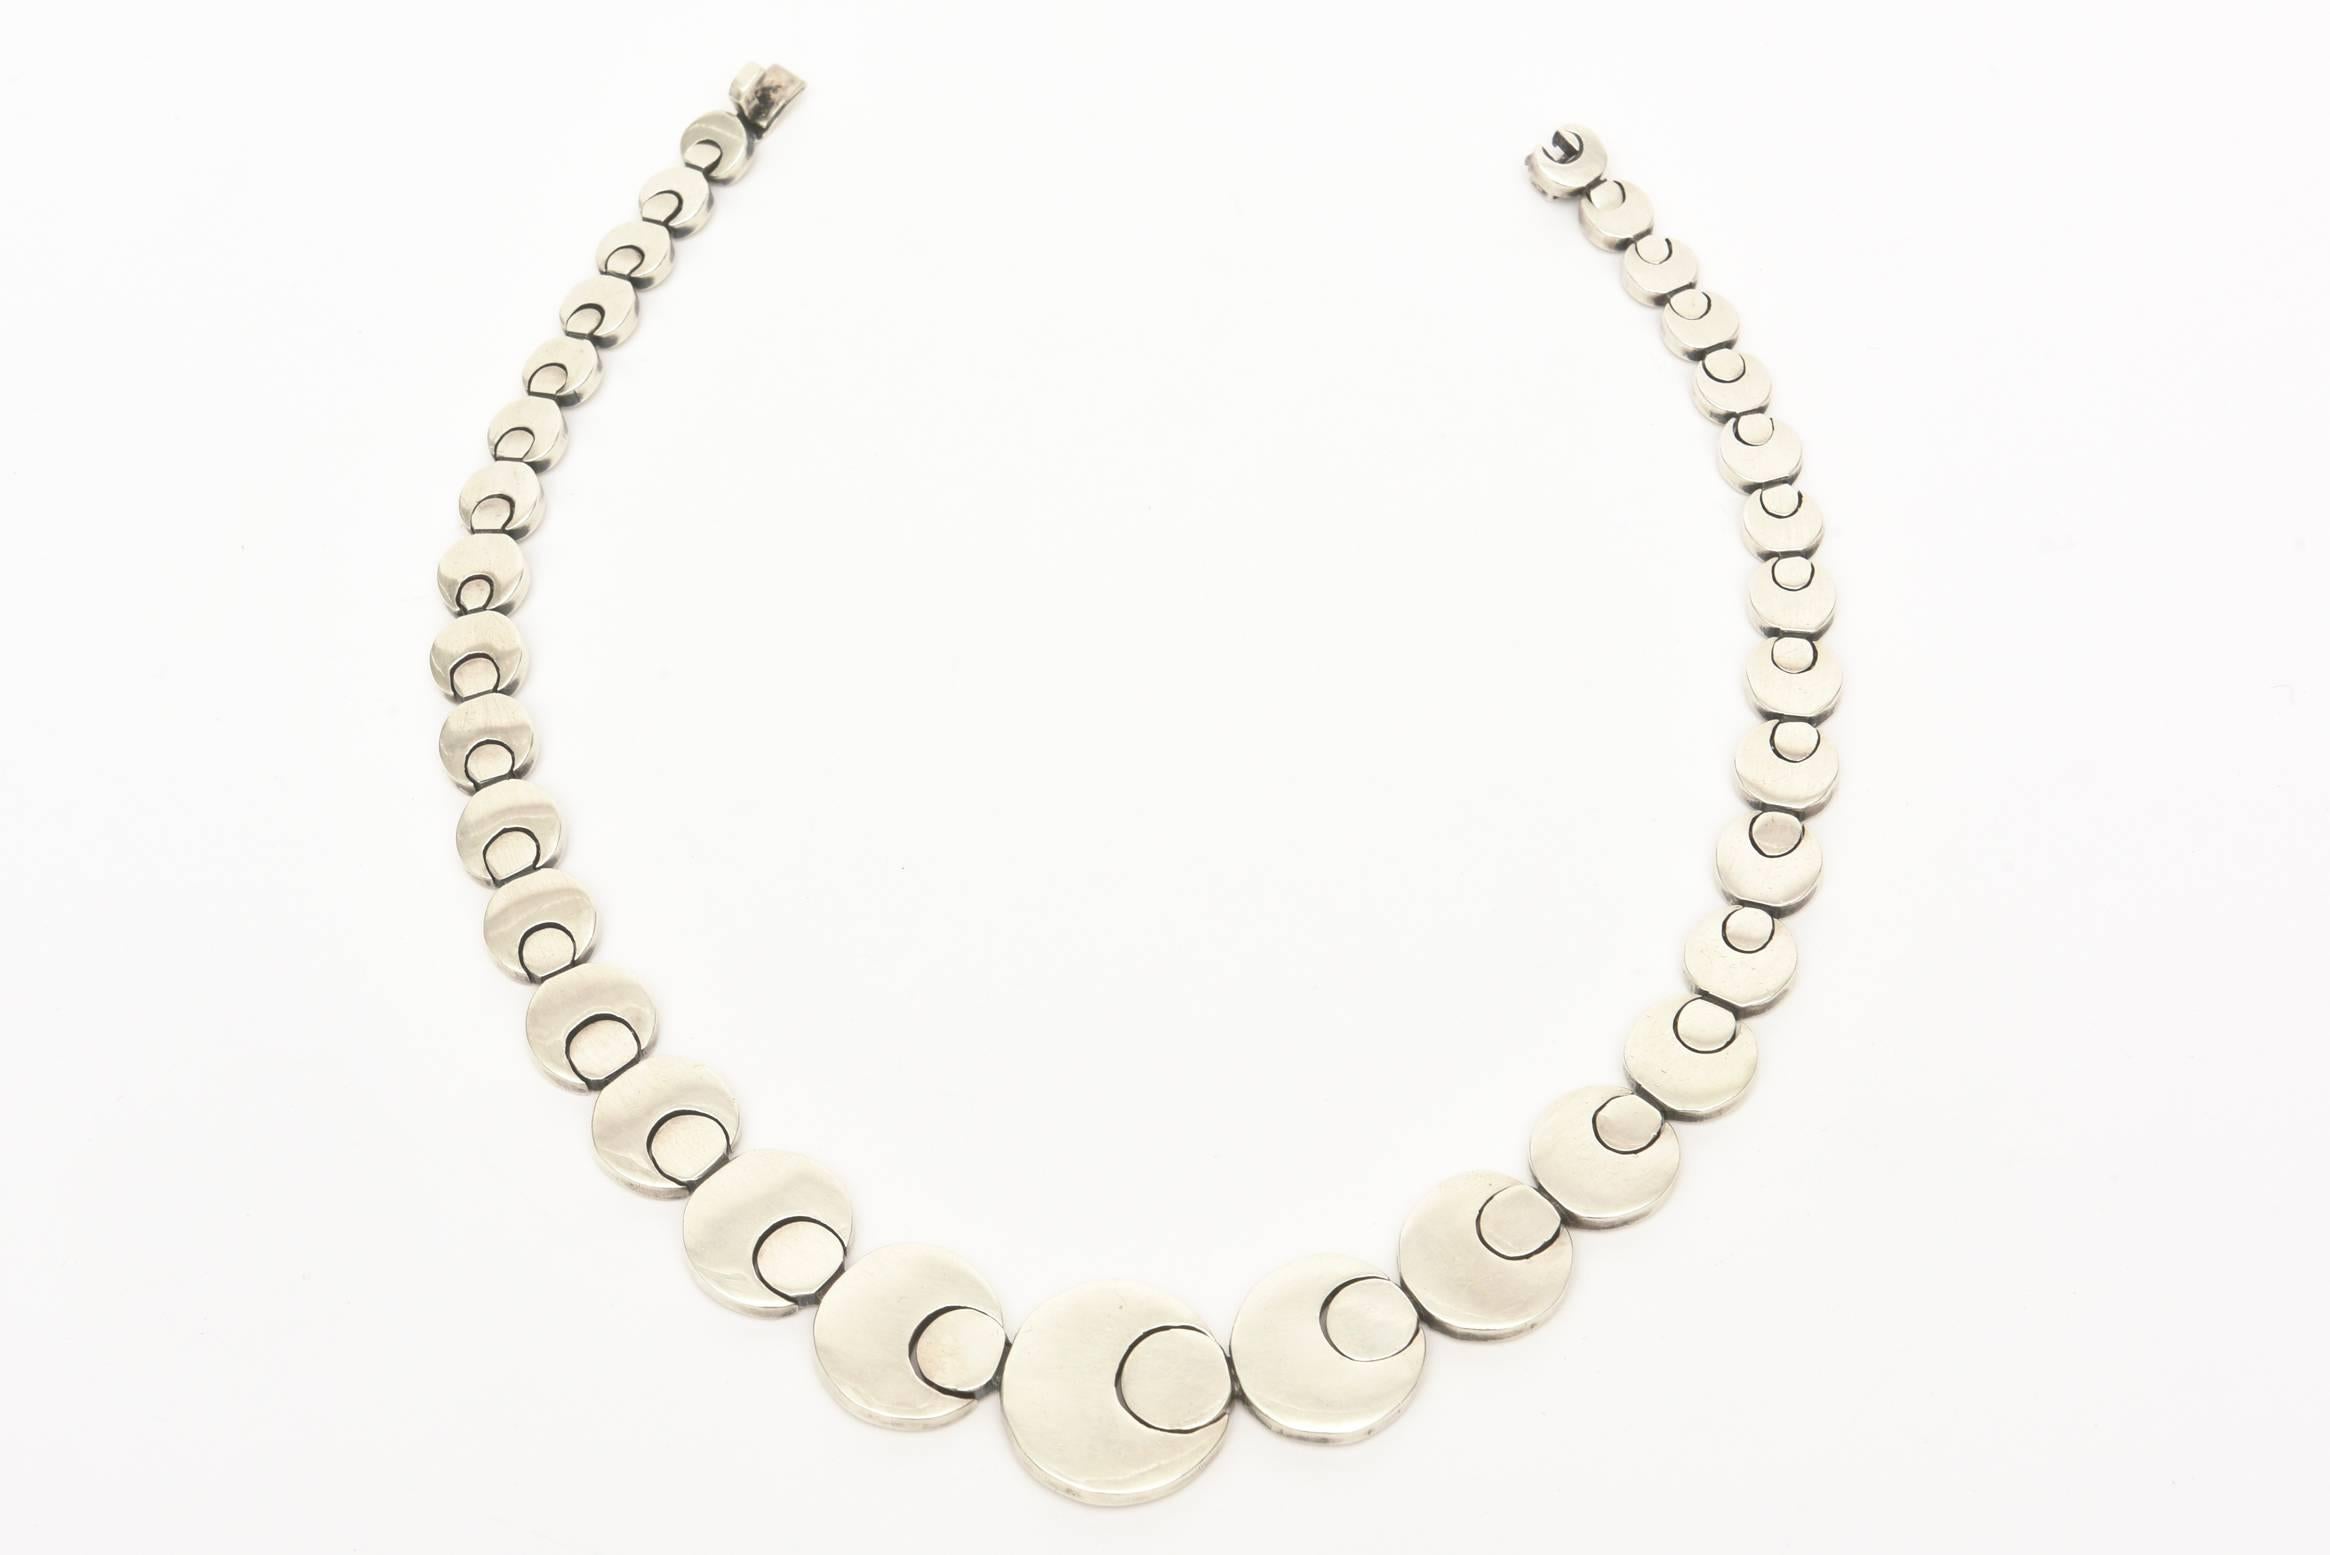 This stunning sculptural reticulated vintage sterling silver necklace sits beautifully on the neck/chest. It has has great weight to it. Very finely made and forever modern and timeless. It is hallmarked Mexico 925 TO-45. It is from the 70's. Goes